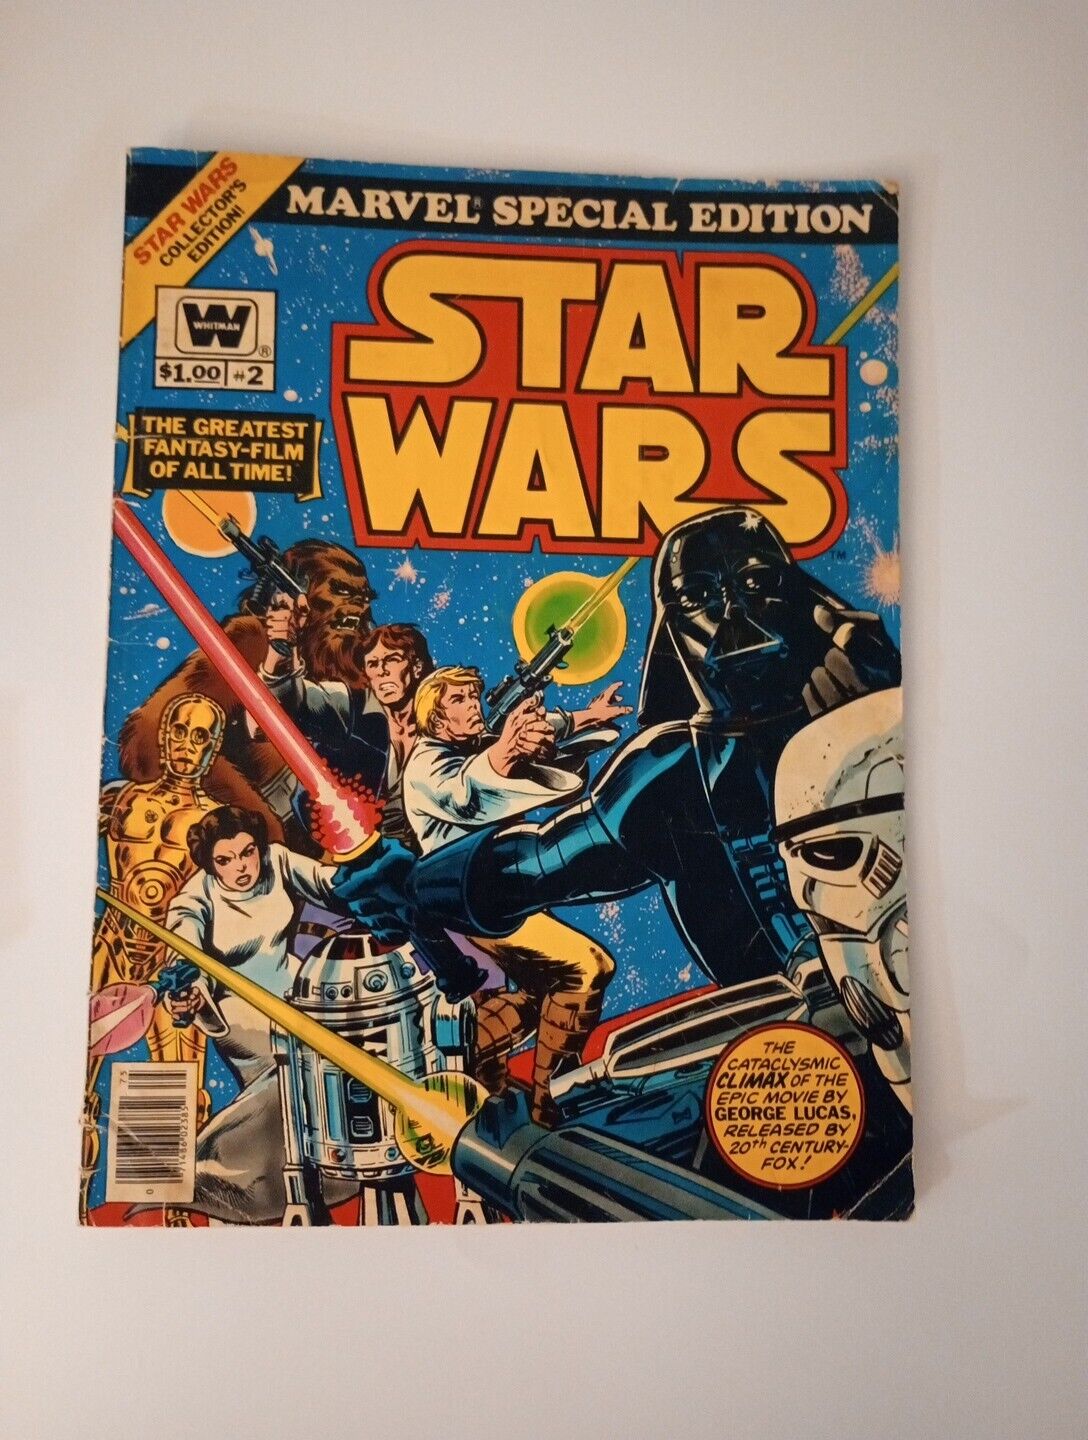 1977 STAR WARS #2 MARVEL SPECIAL EDITION COLLECTORS GIANT VINTAGE COMIC Whitman 